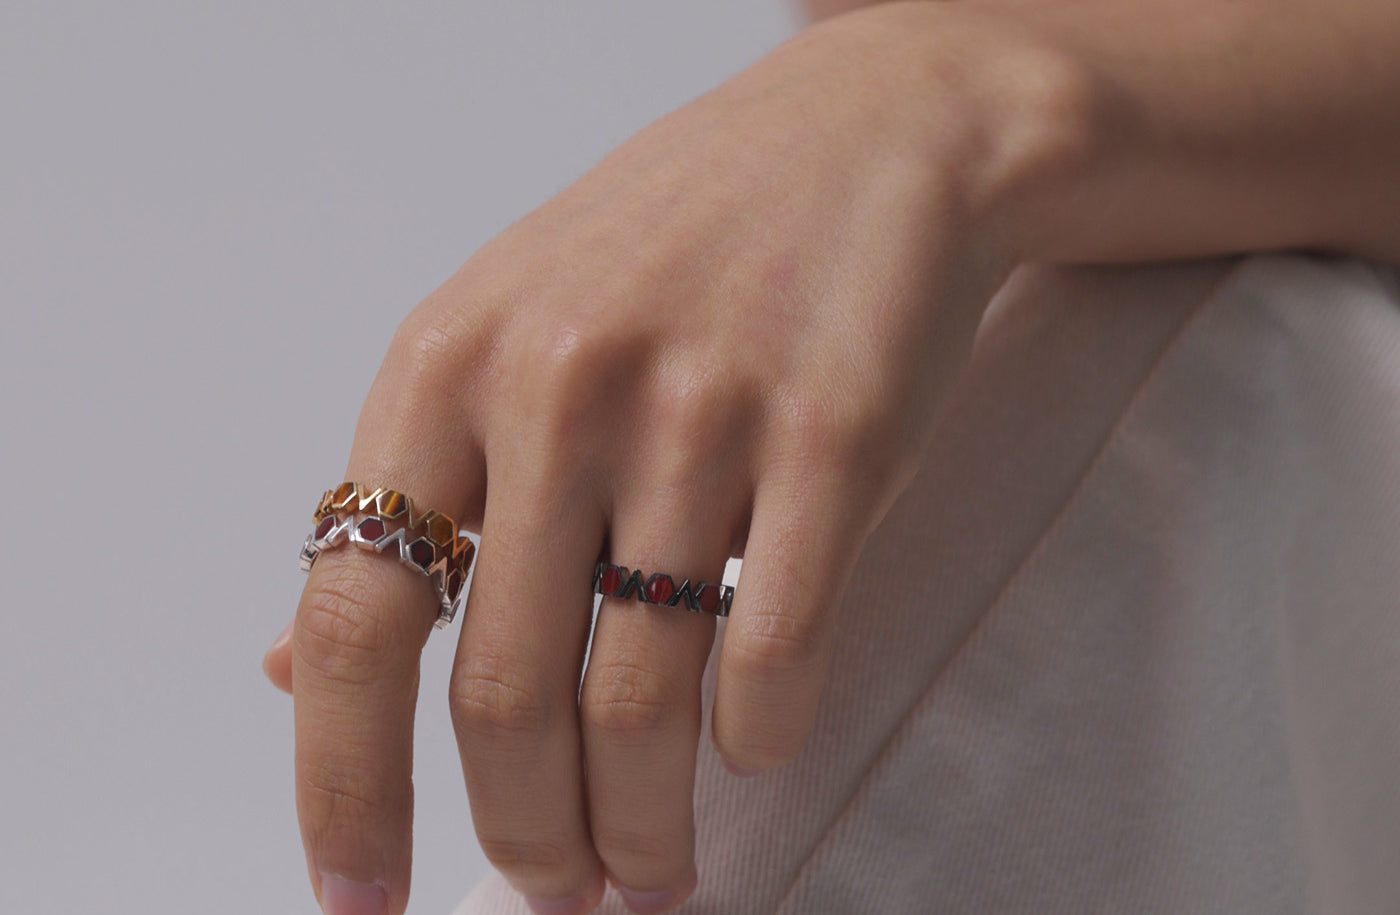 Rhodium Plated Silver Band with repeating Carnelian hexagons and V shapes, Medium - Model shot